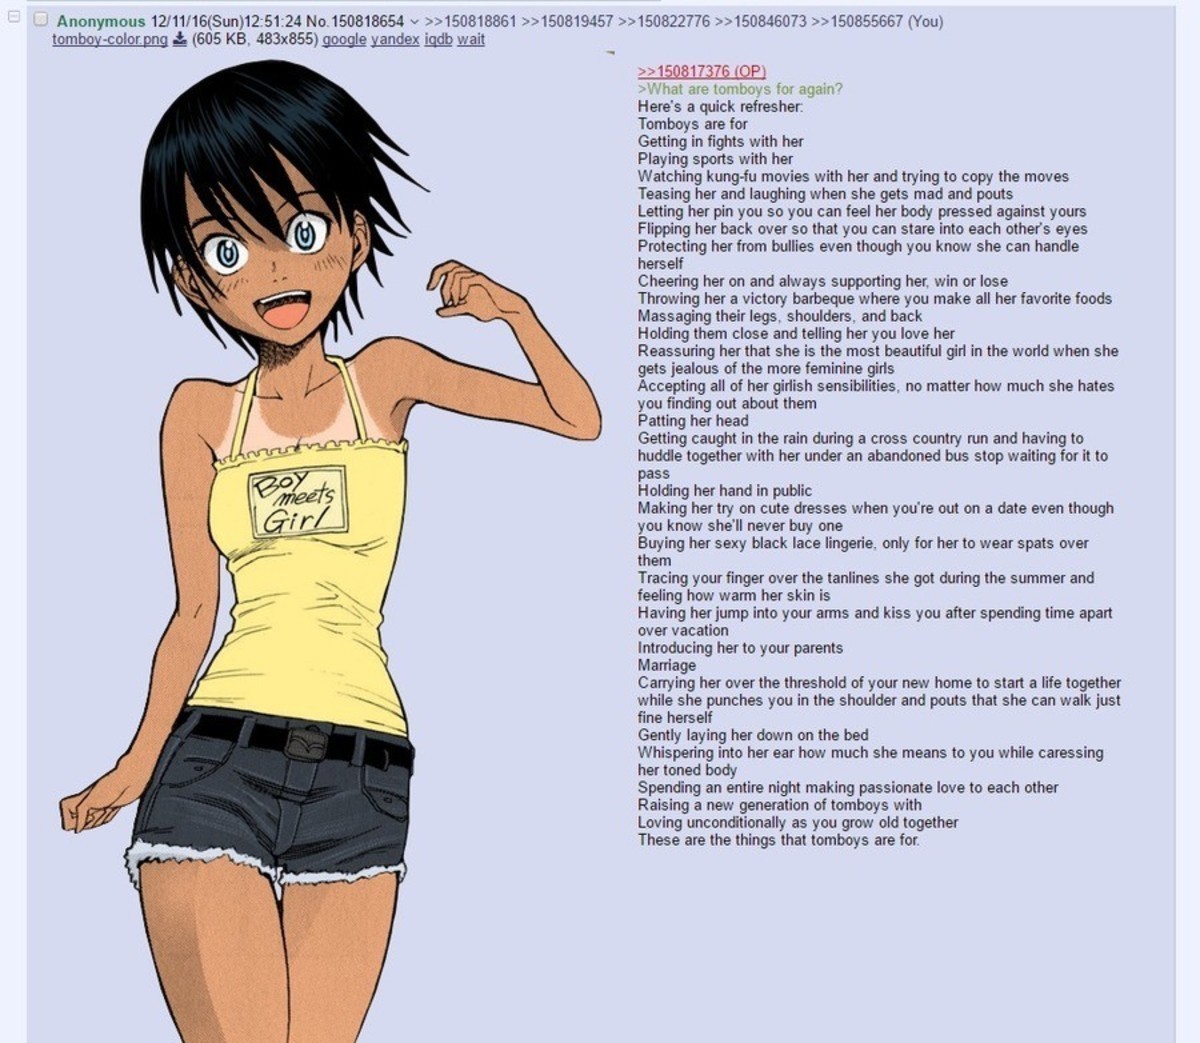 What tomboys are for.jpg.